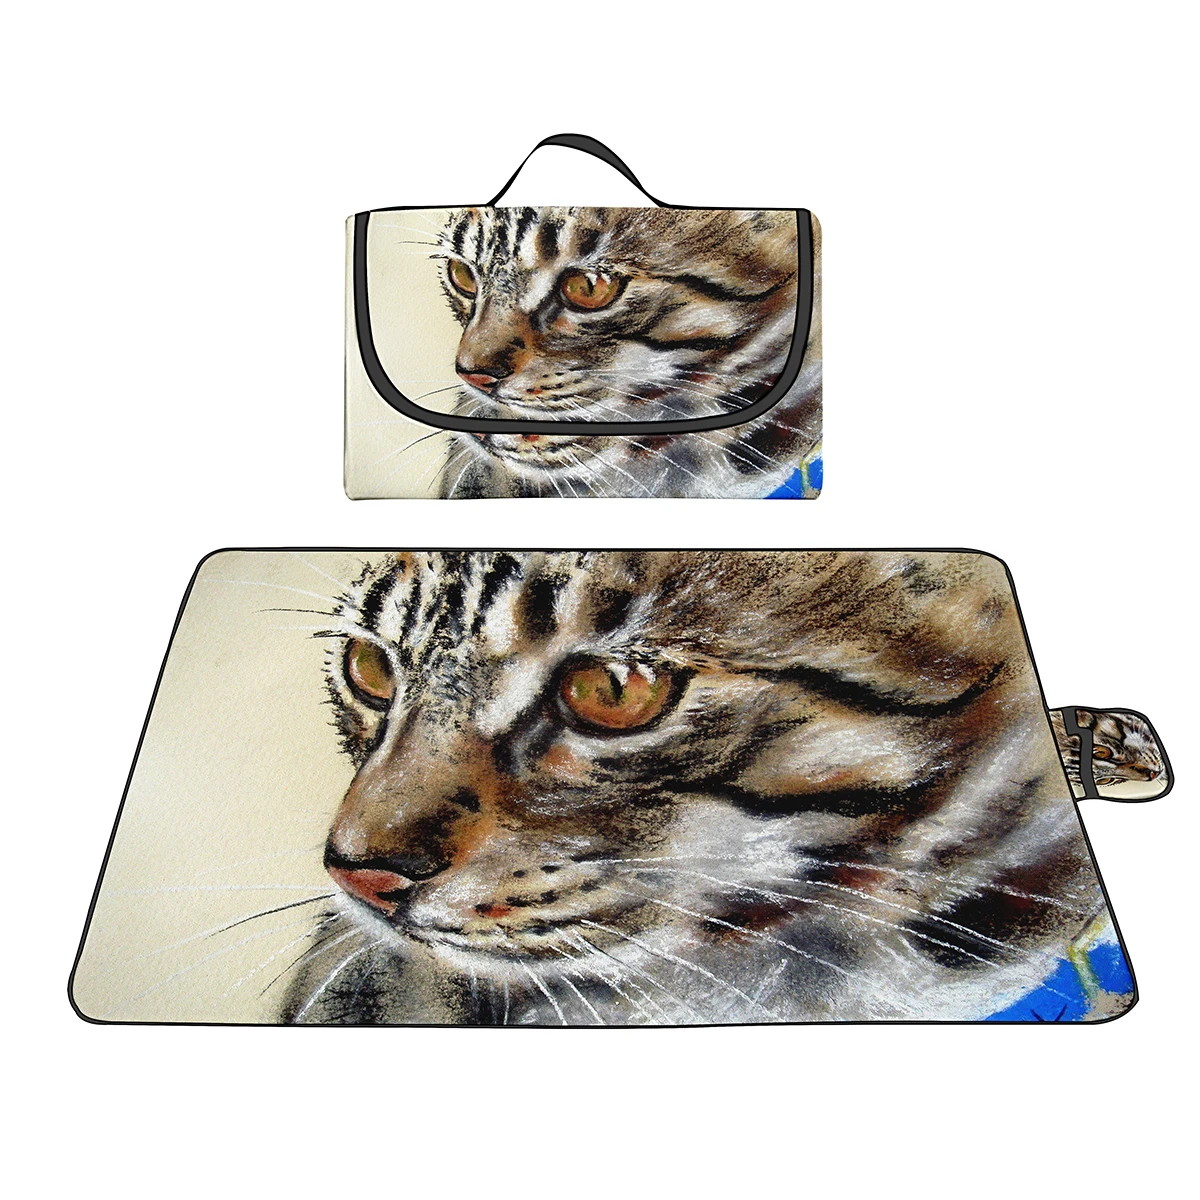 

Picnic Blanket,Sandproof Beach Mat & Outdoor Waterproof Oxford Picnic Mat for Camping on Grass,Park,Travelling(Oil Painting Cat)